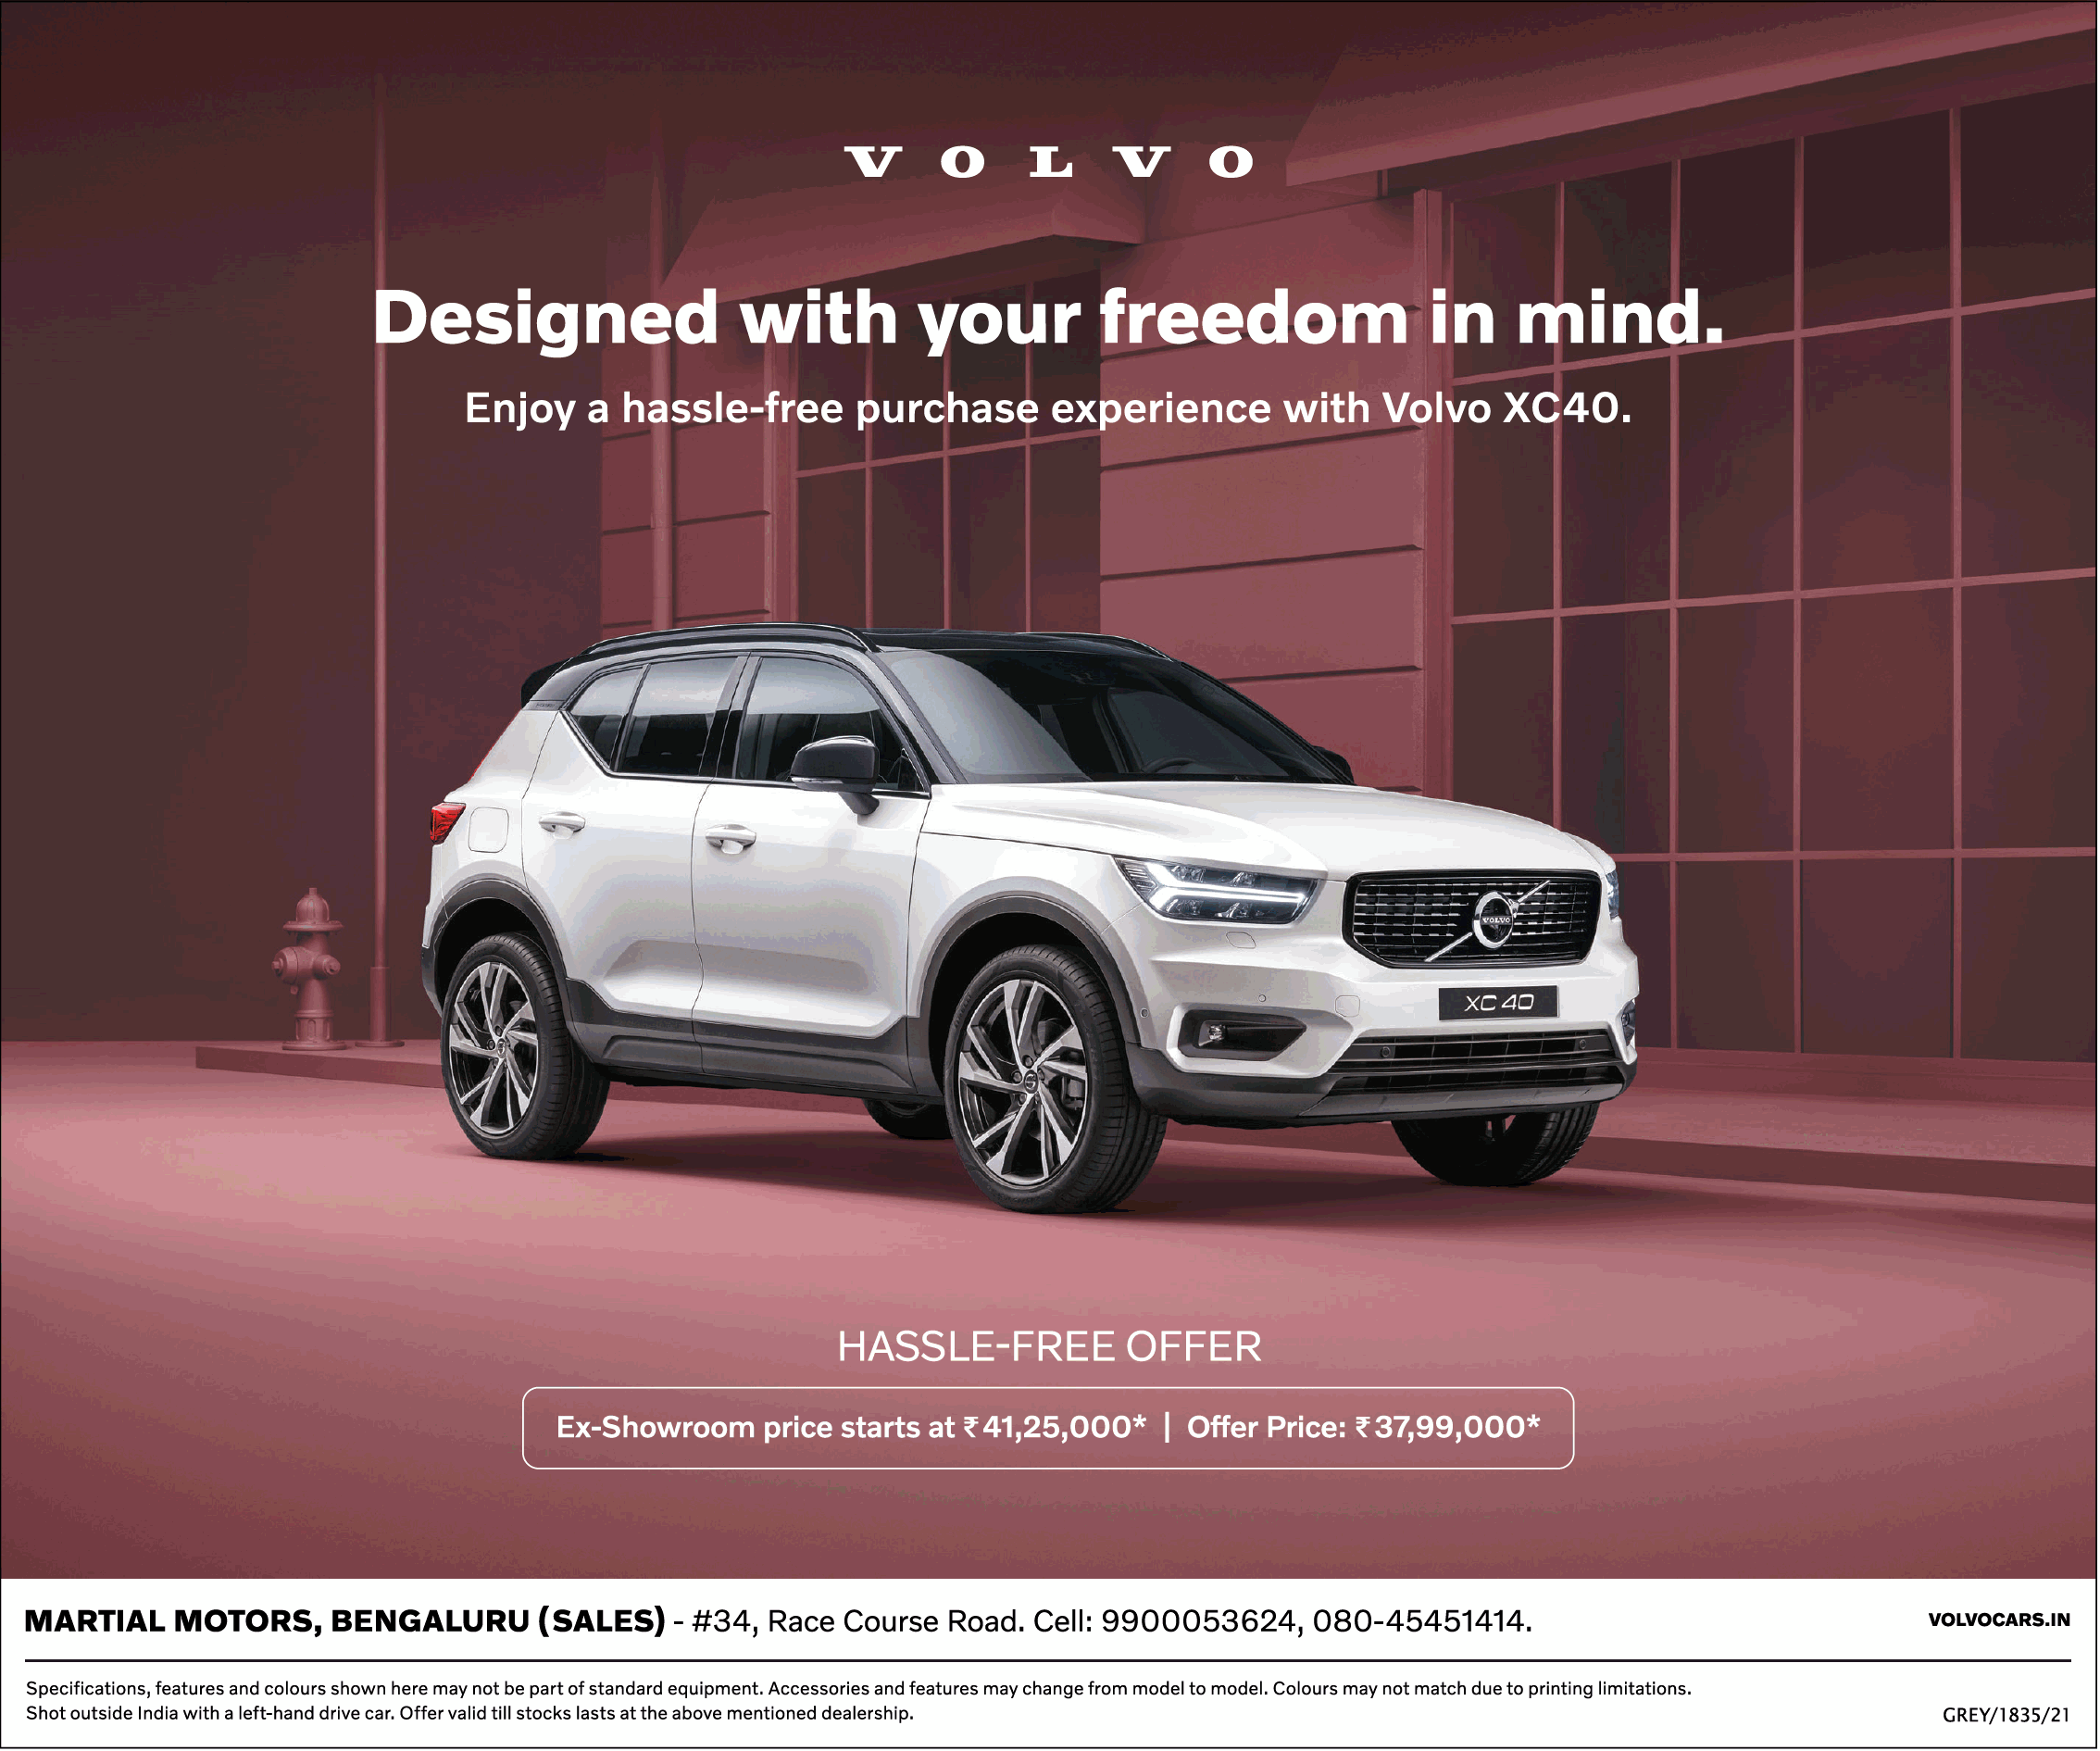 volvo-xc40-car-ex-showroom--offer-price-at-rs-37-lakhs-99-thousand-ad-times-of-india-bangalore-9-7-2021